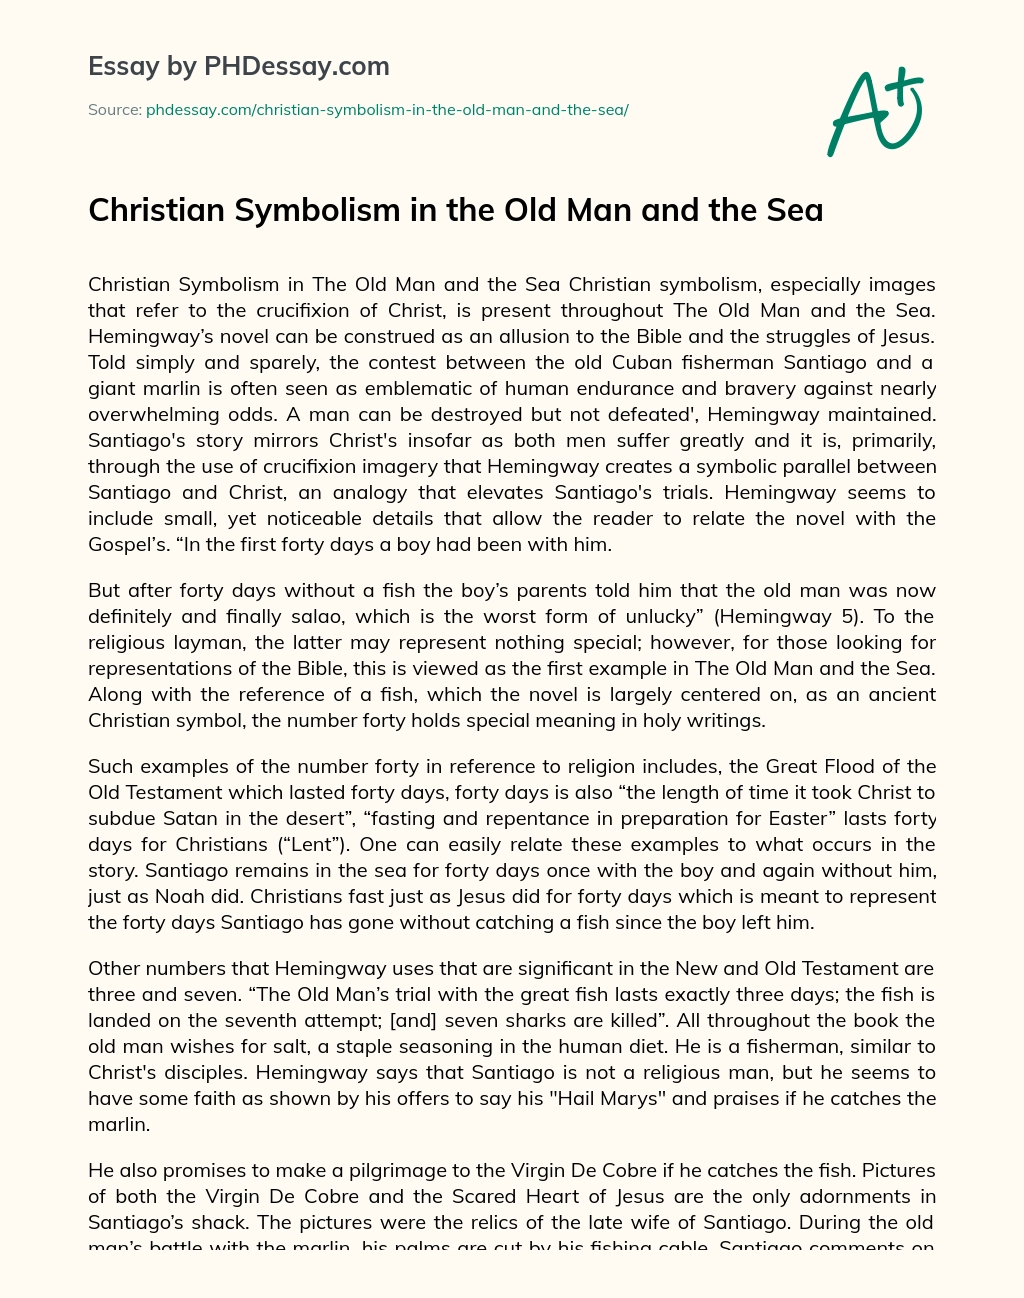 Christian Symbolism in the Old Man and the Sea essay